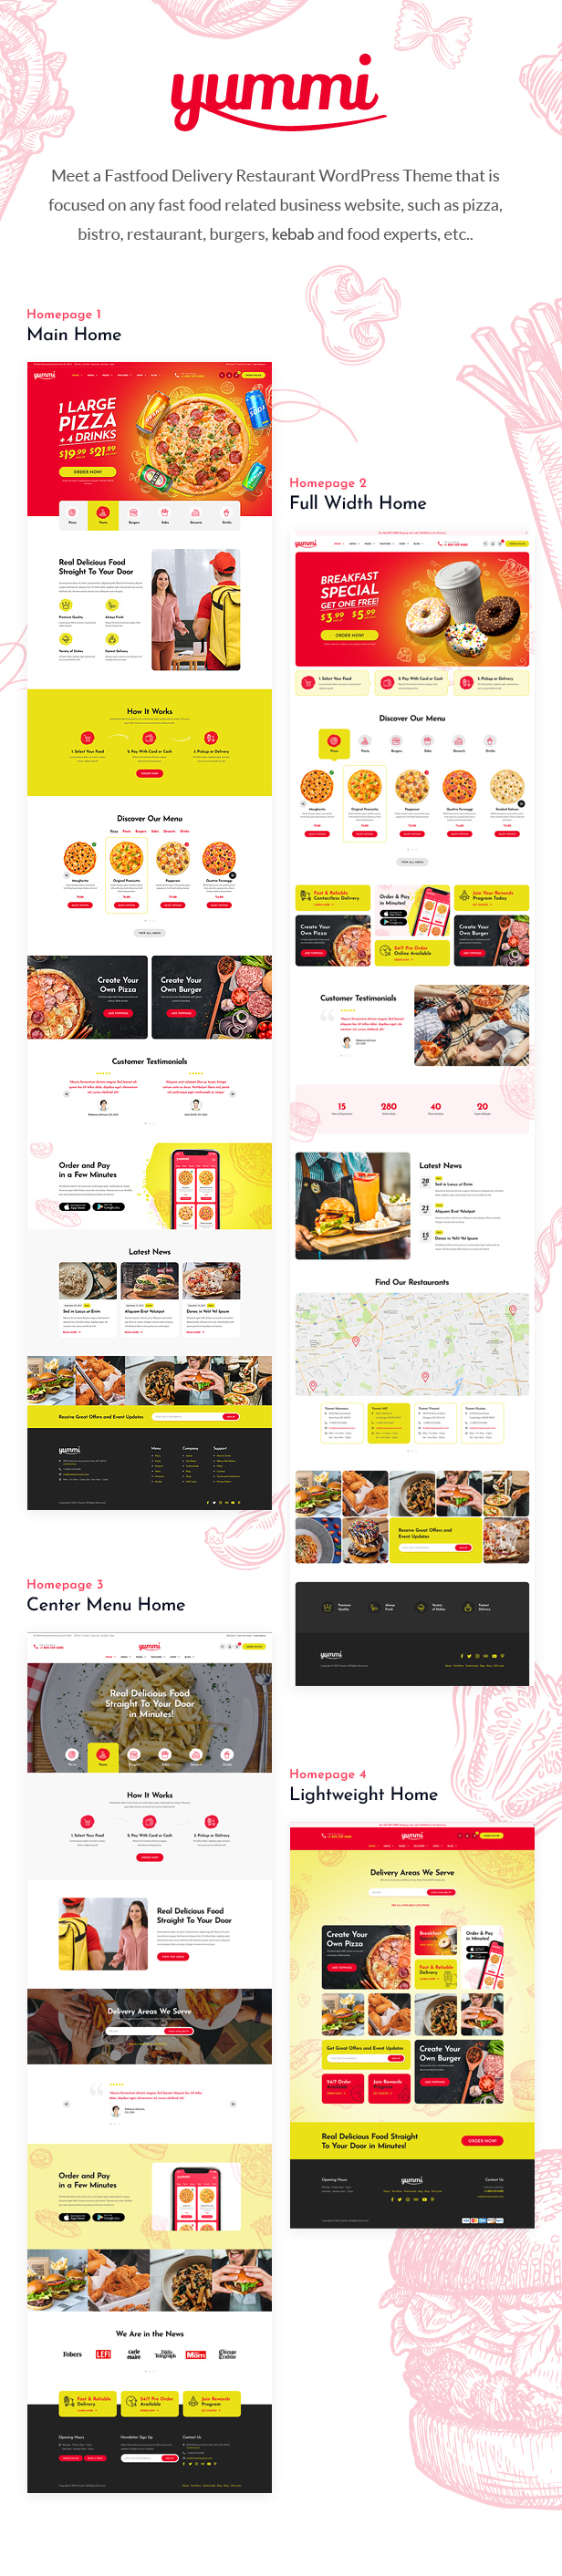 Images of website pages for the restaurant theme.